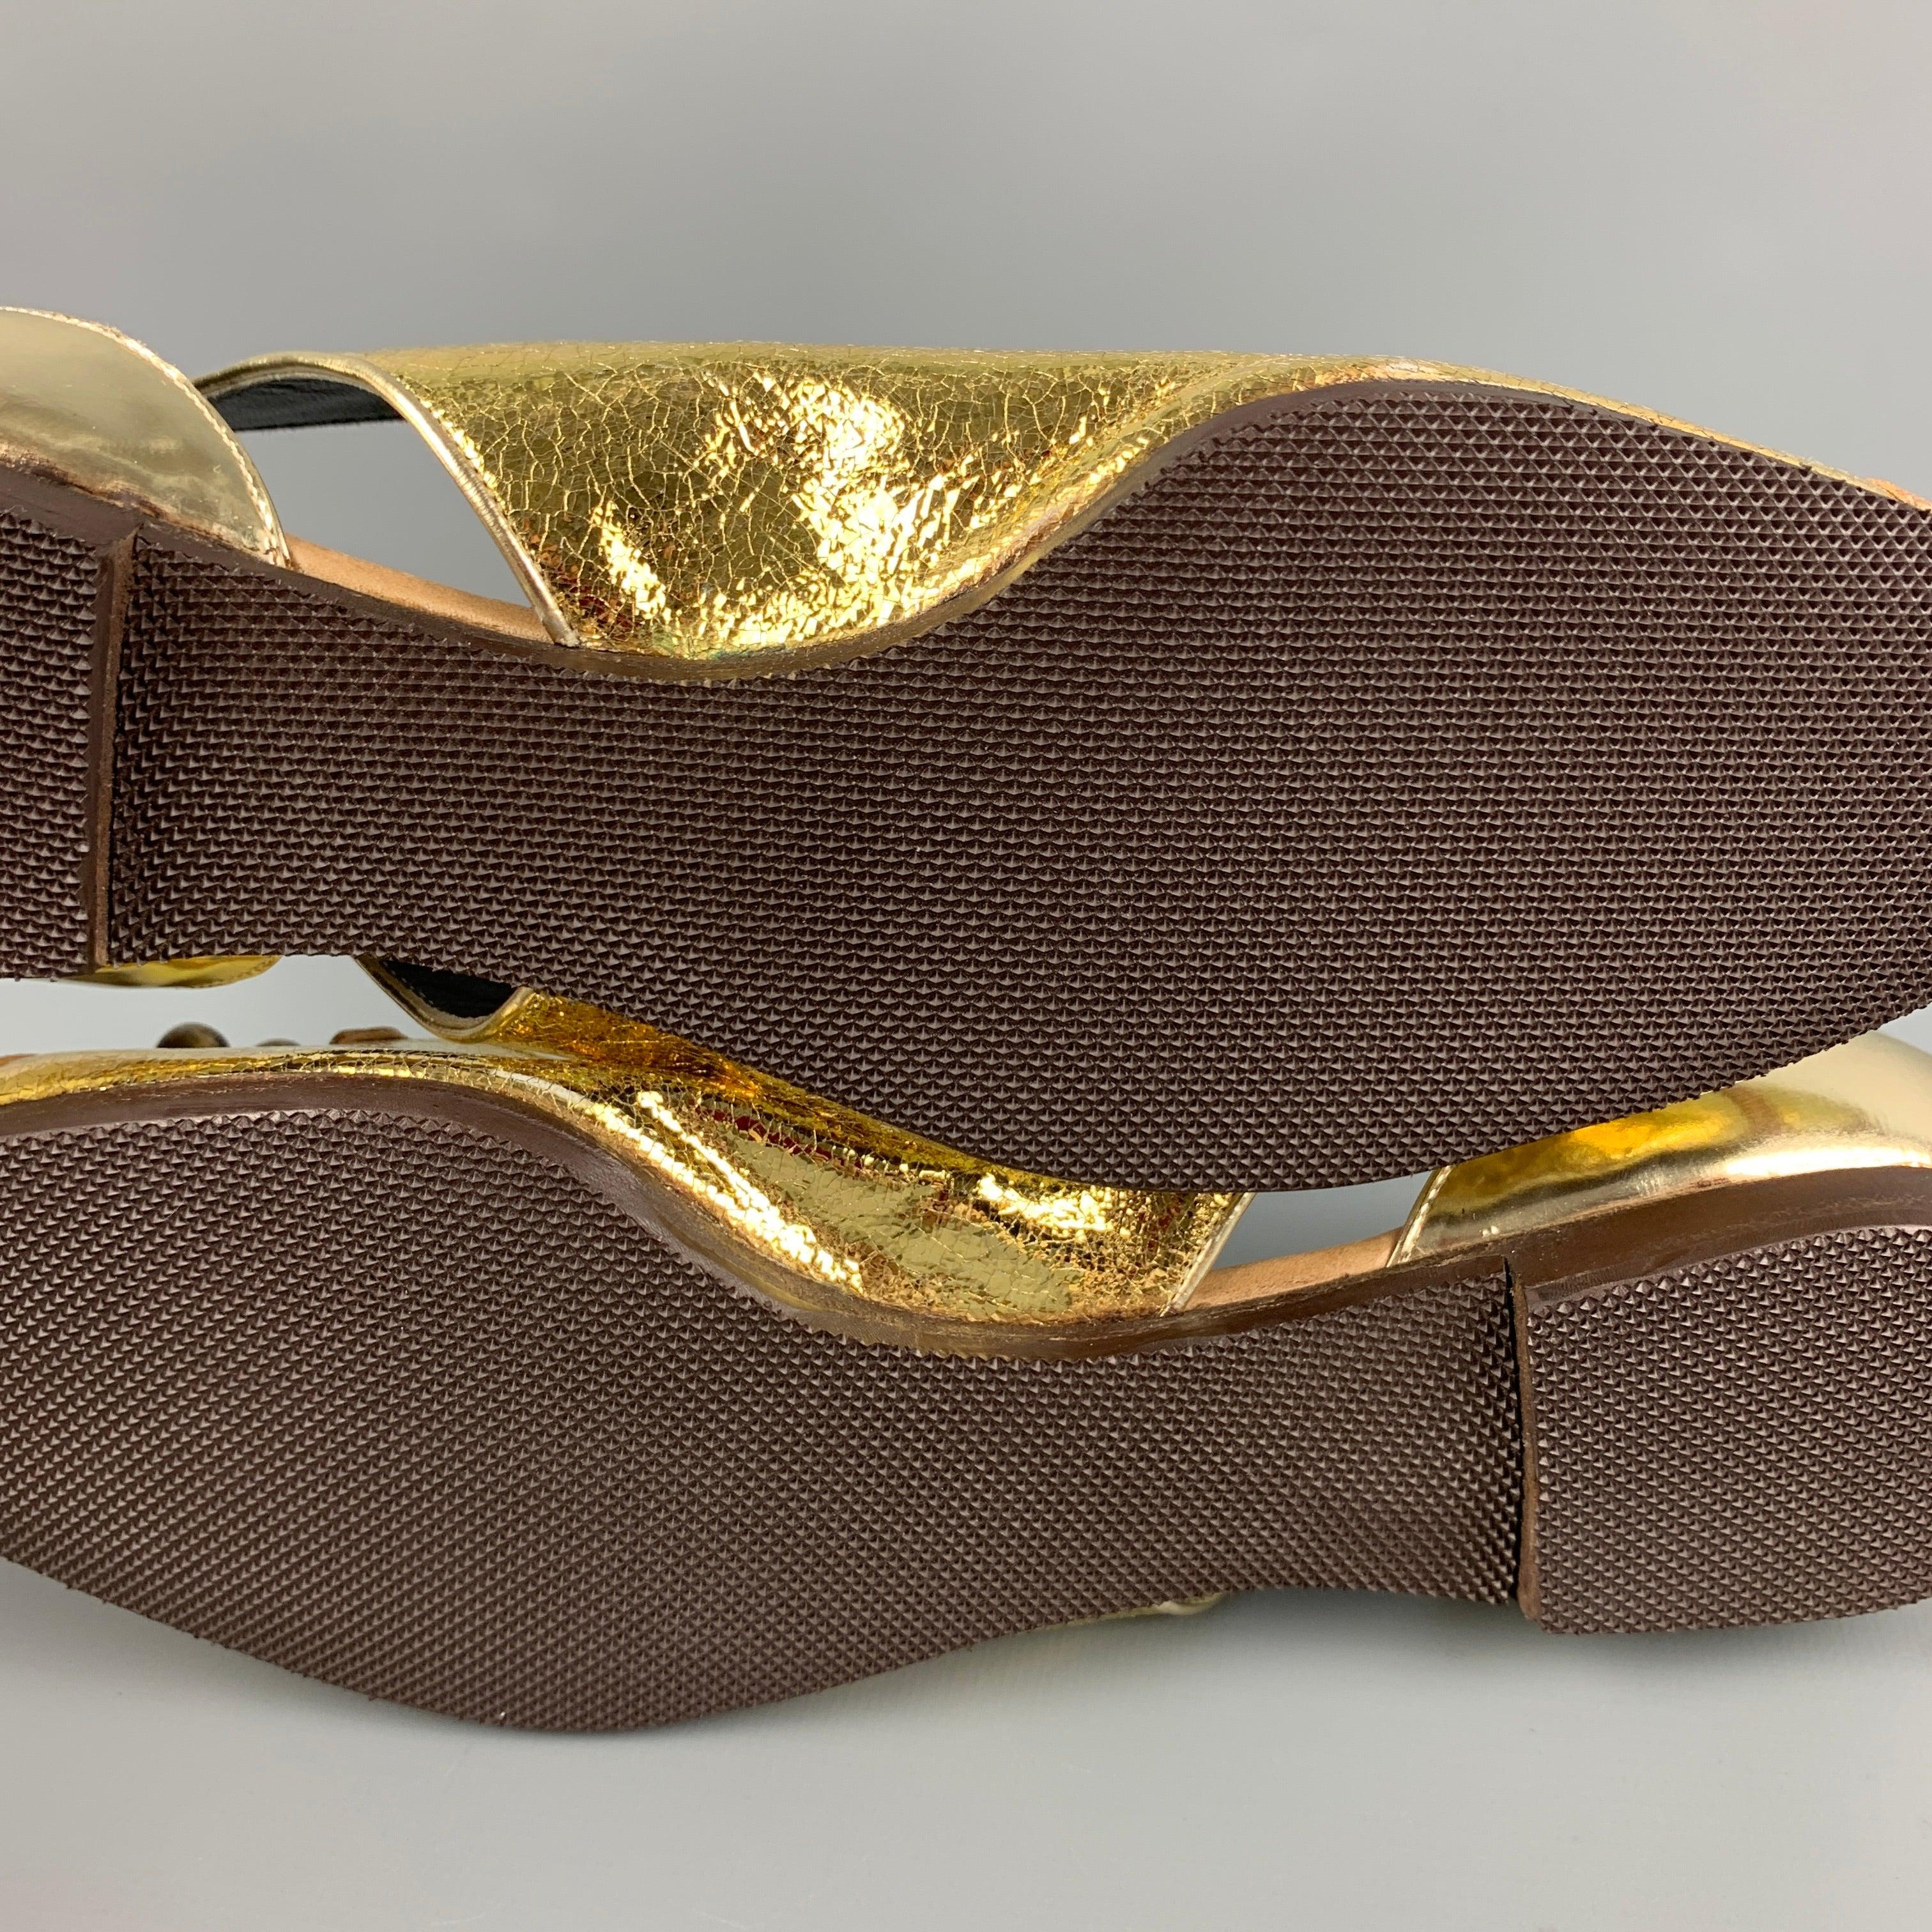 PROENZA SCHOULER Size 7 Gold Leather Metallic Flats For Sale 3